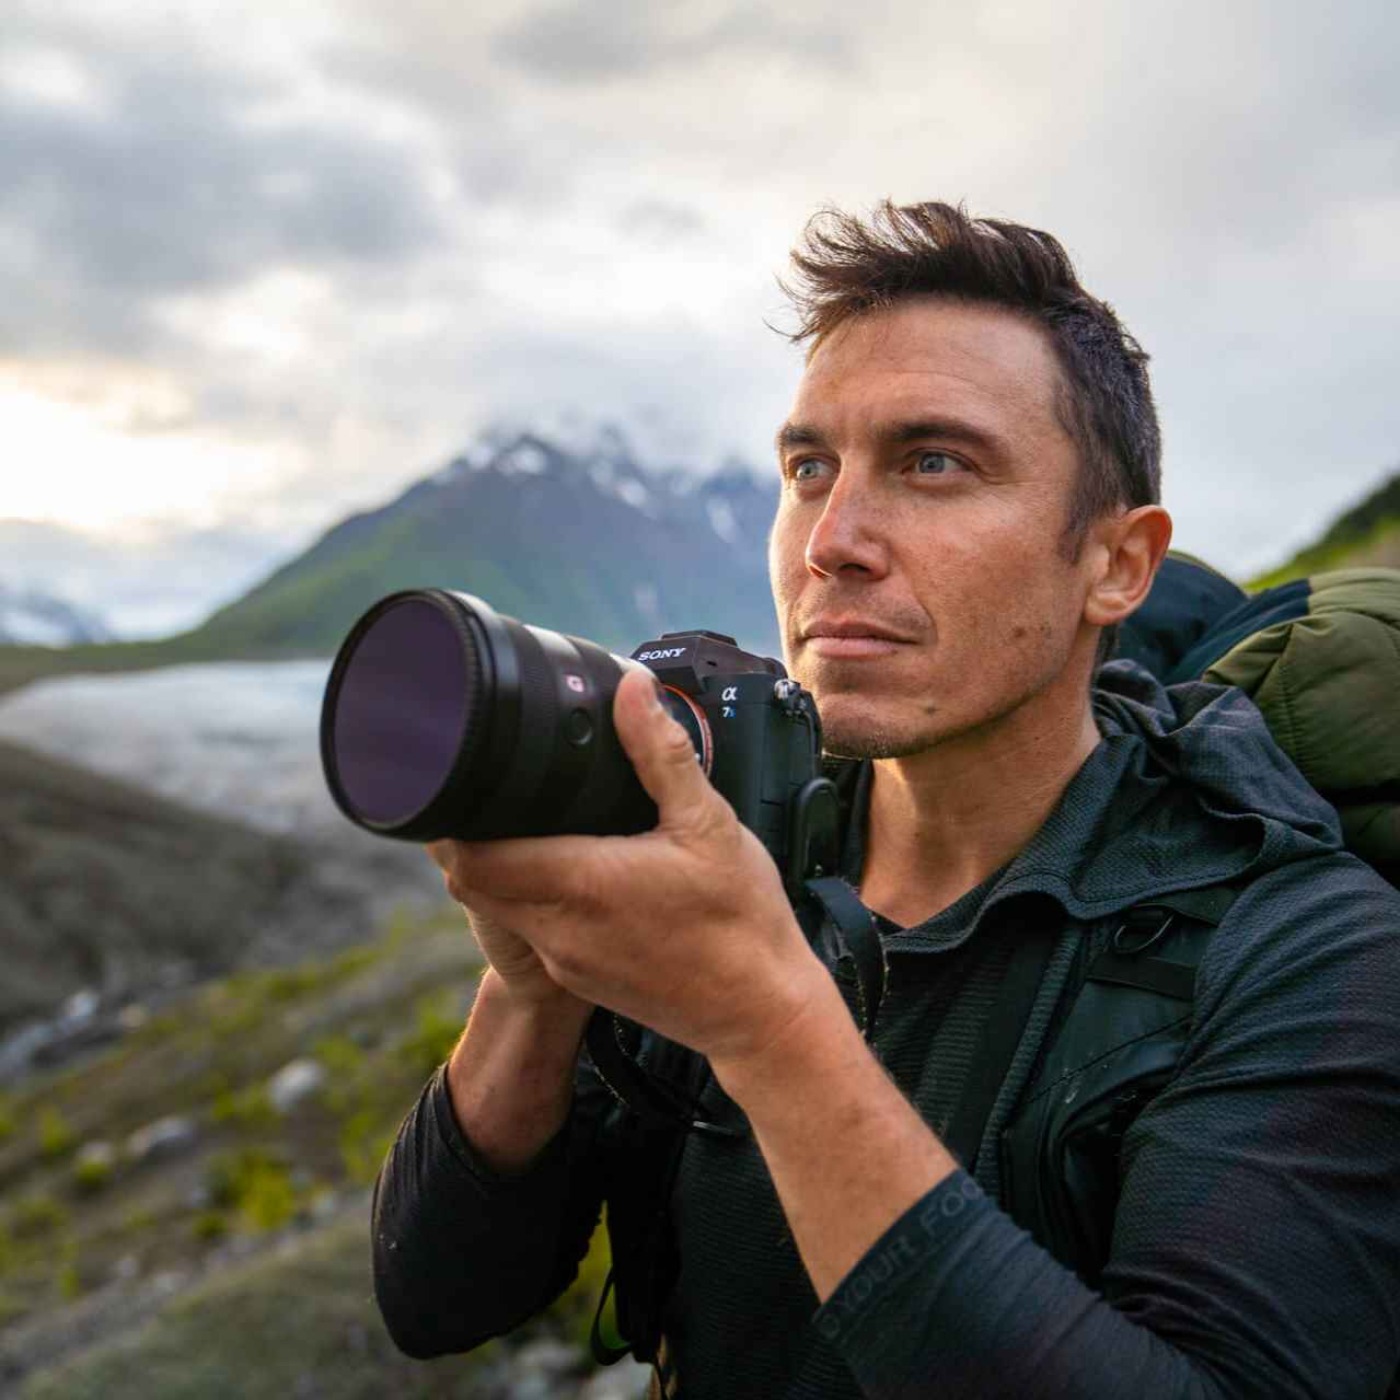 #29: Shots of Adventure or the joy of surfing in ice cold water – with Chris Burkard